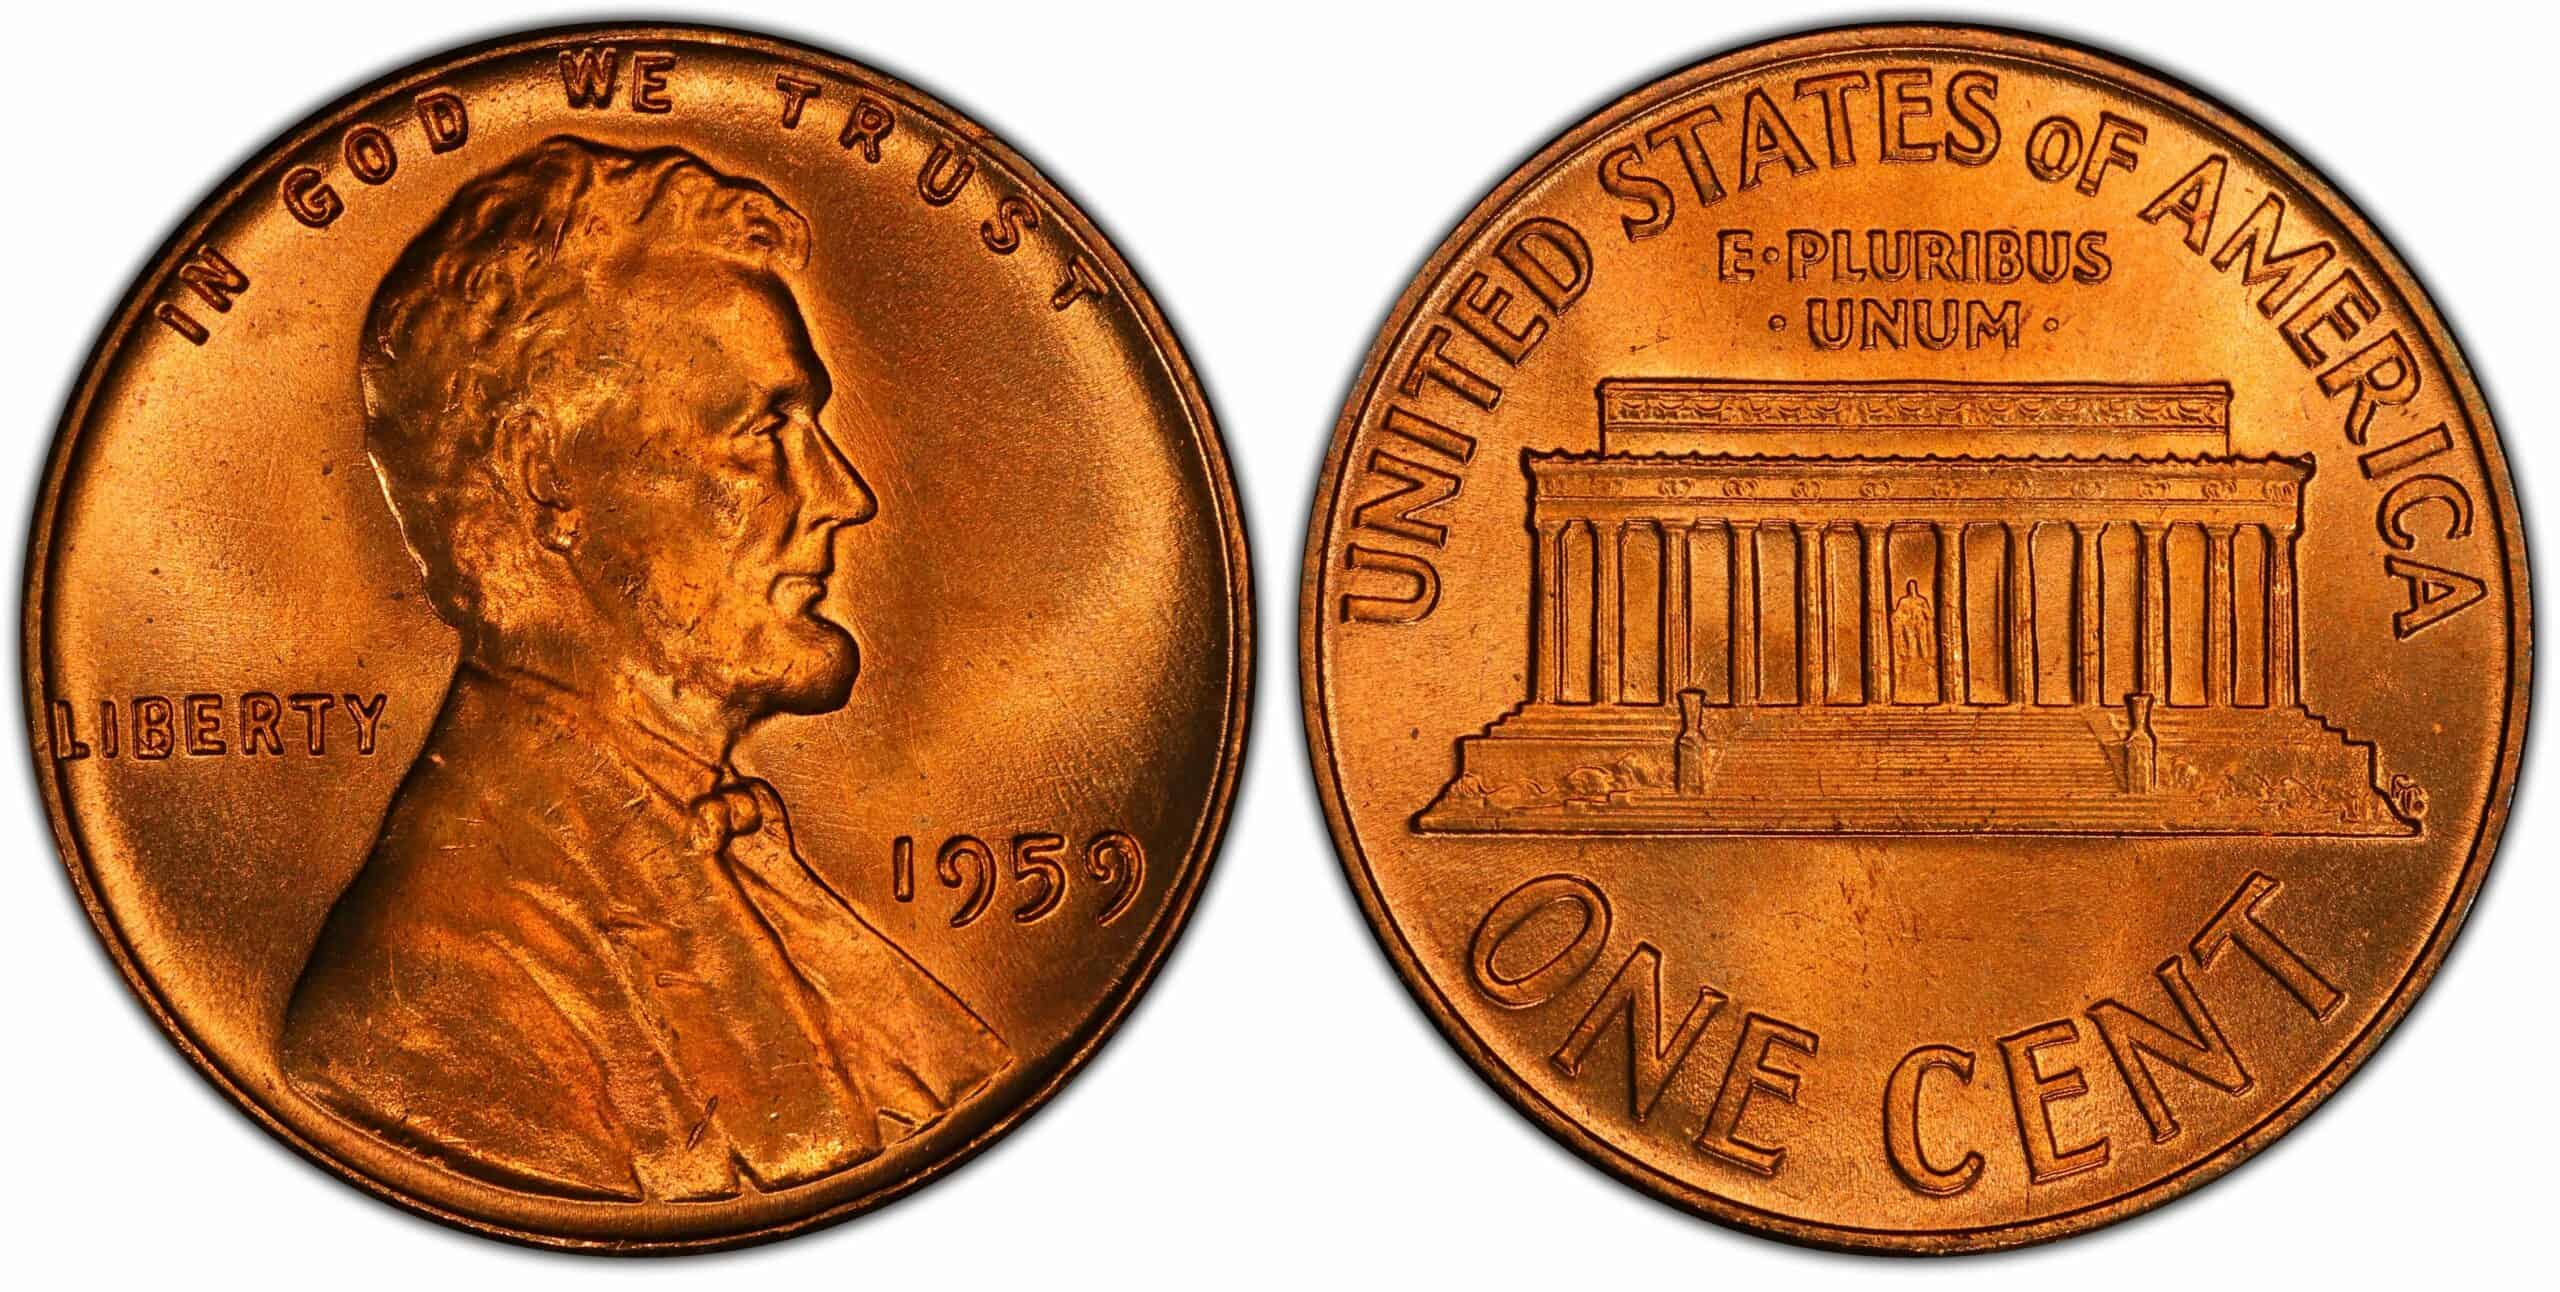 1959 Wheat Penny Value Guides (Errors, “D”, and No Mint Mark)